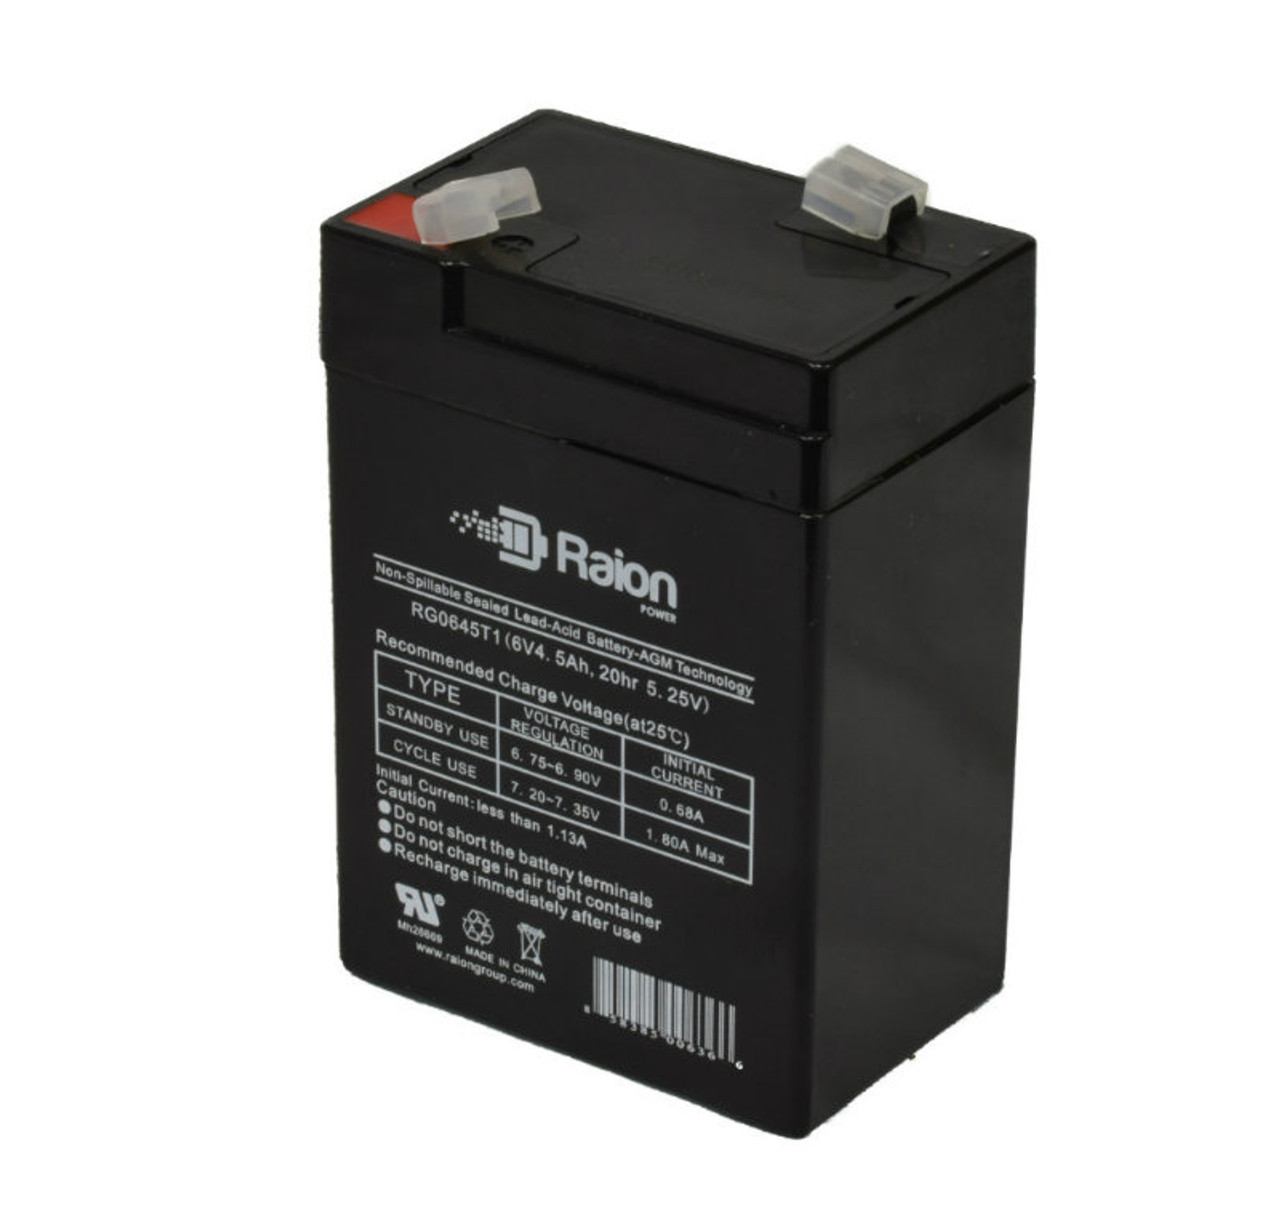 Raion Power RG0645T1 6V 4.5Ah Replacement Battery Cartridge for Big Beam 2CL6S5